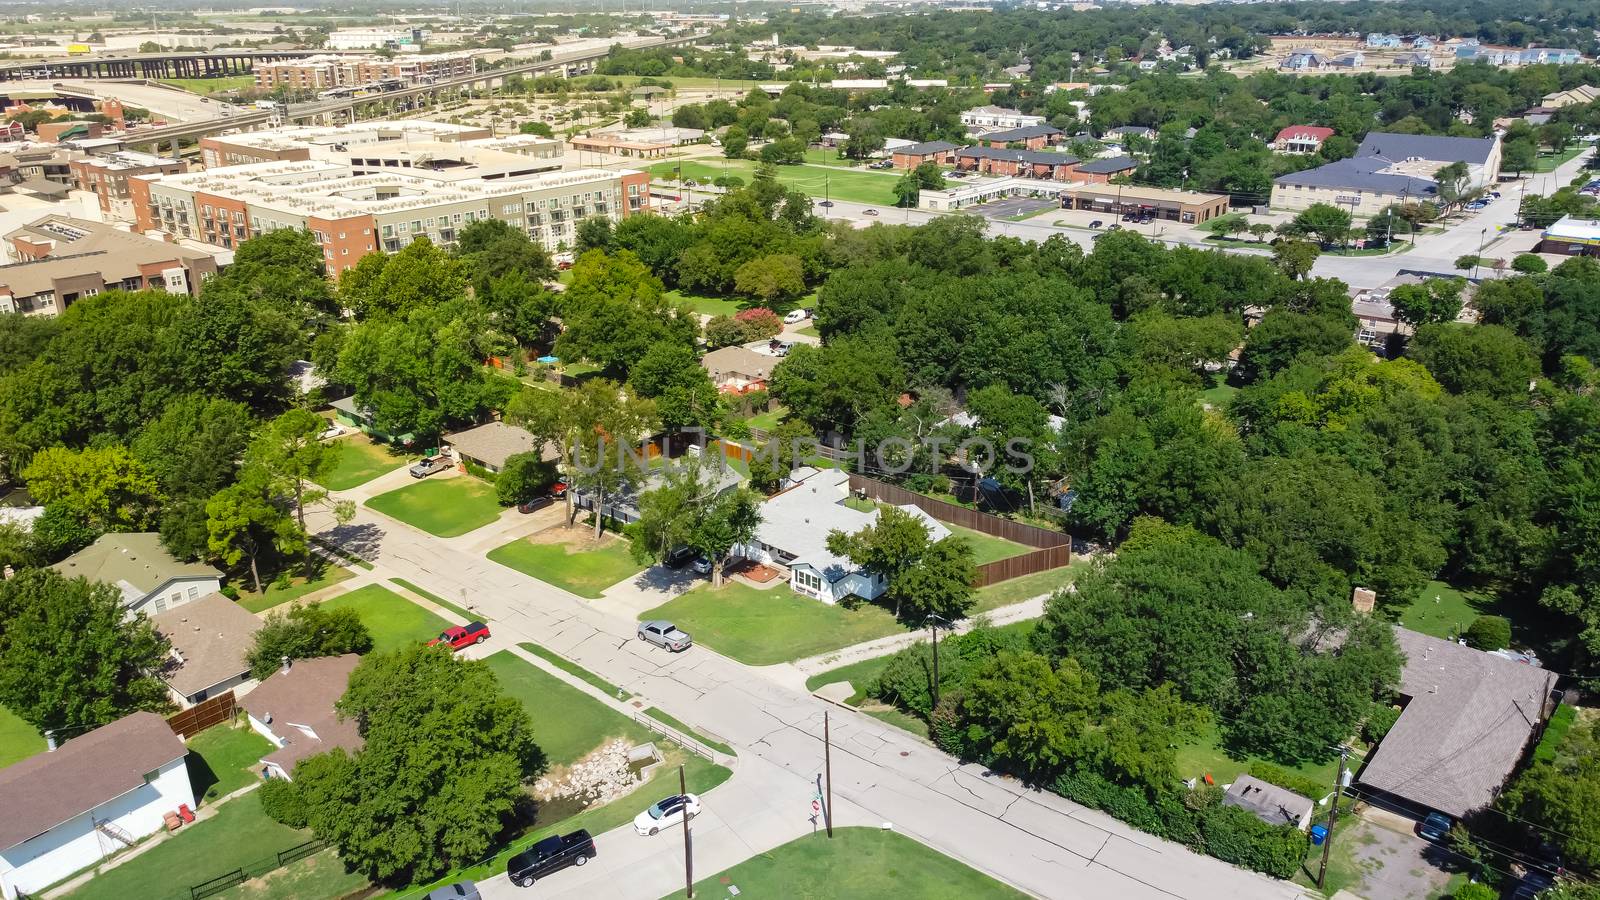 Top view green residential area near historic downtown Carrollton, Texas with single family houses surrounded by mature trees.